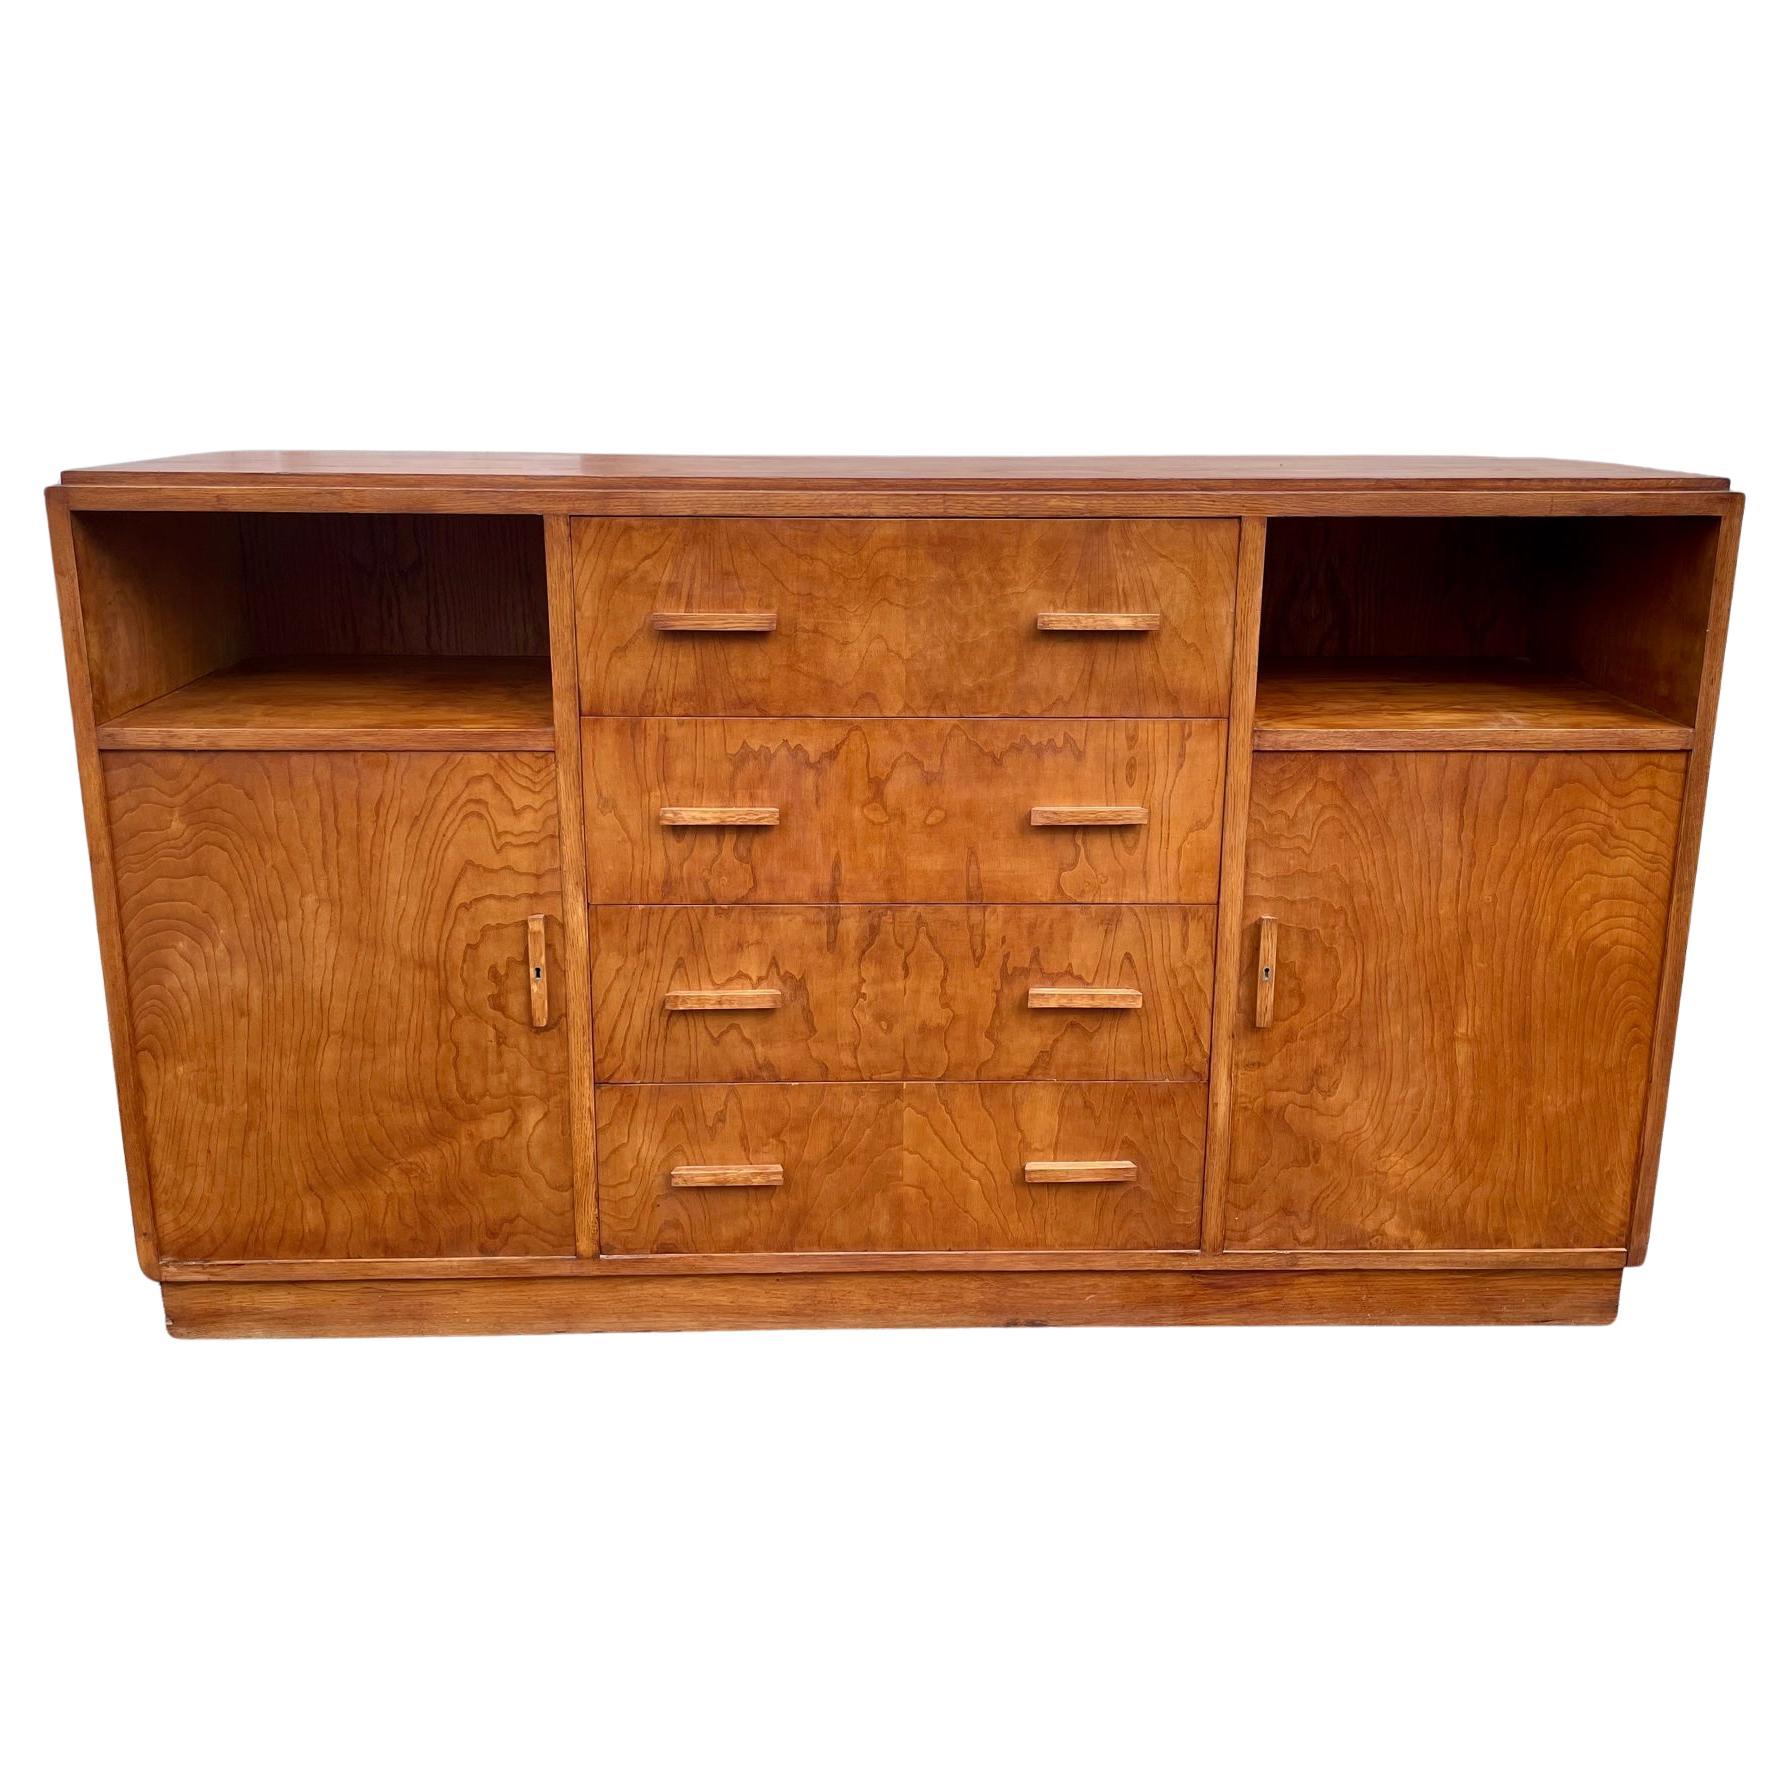 Cabinet from Maison Majorelle 1940's